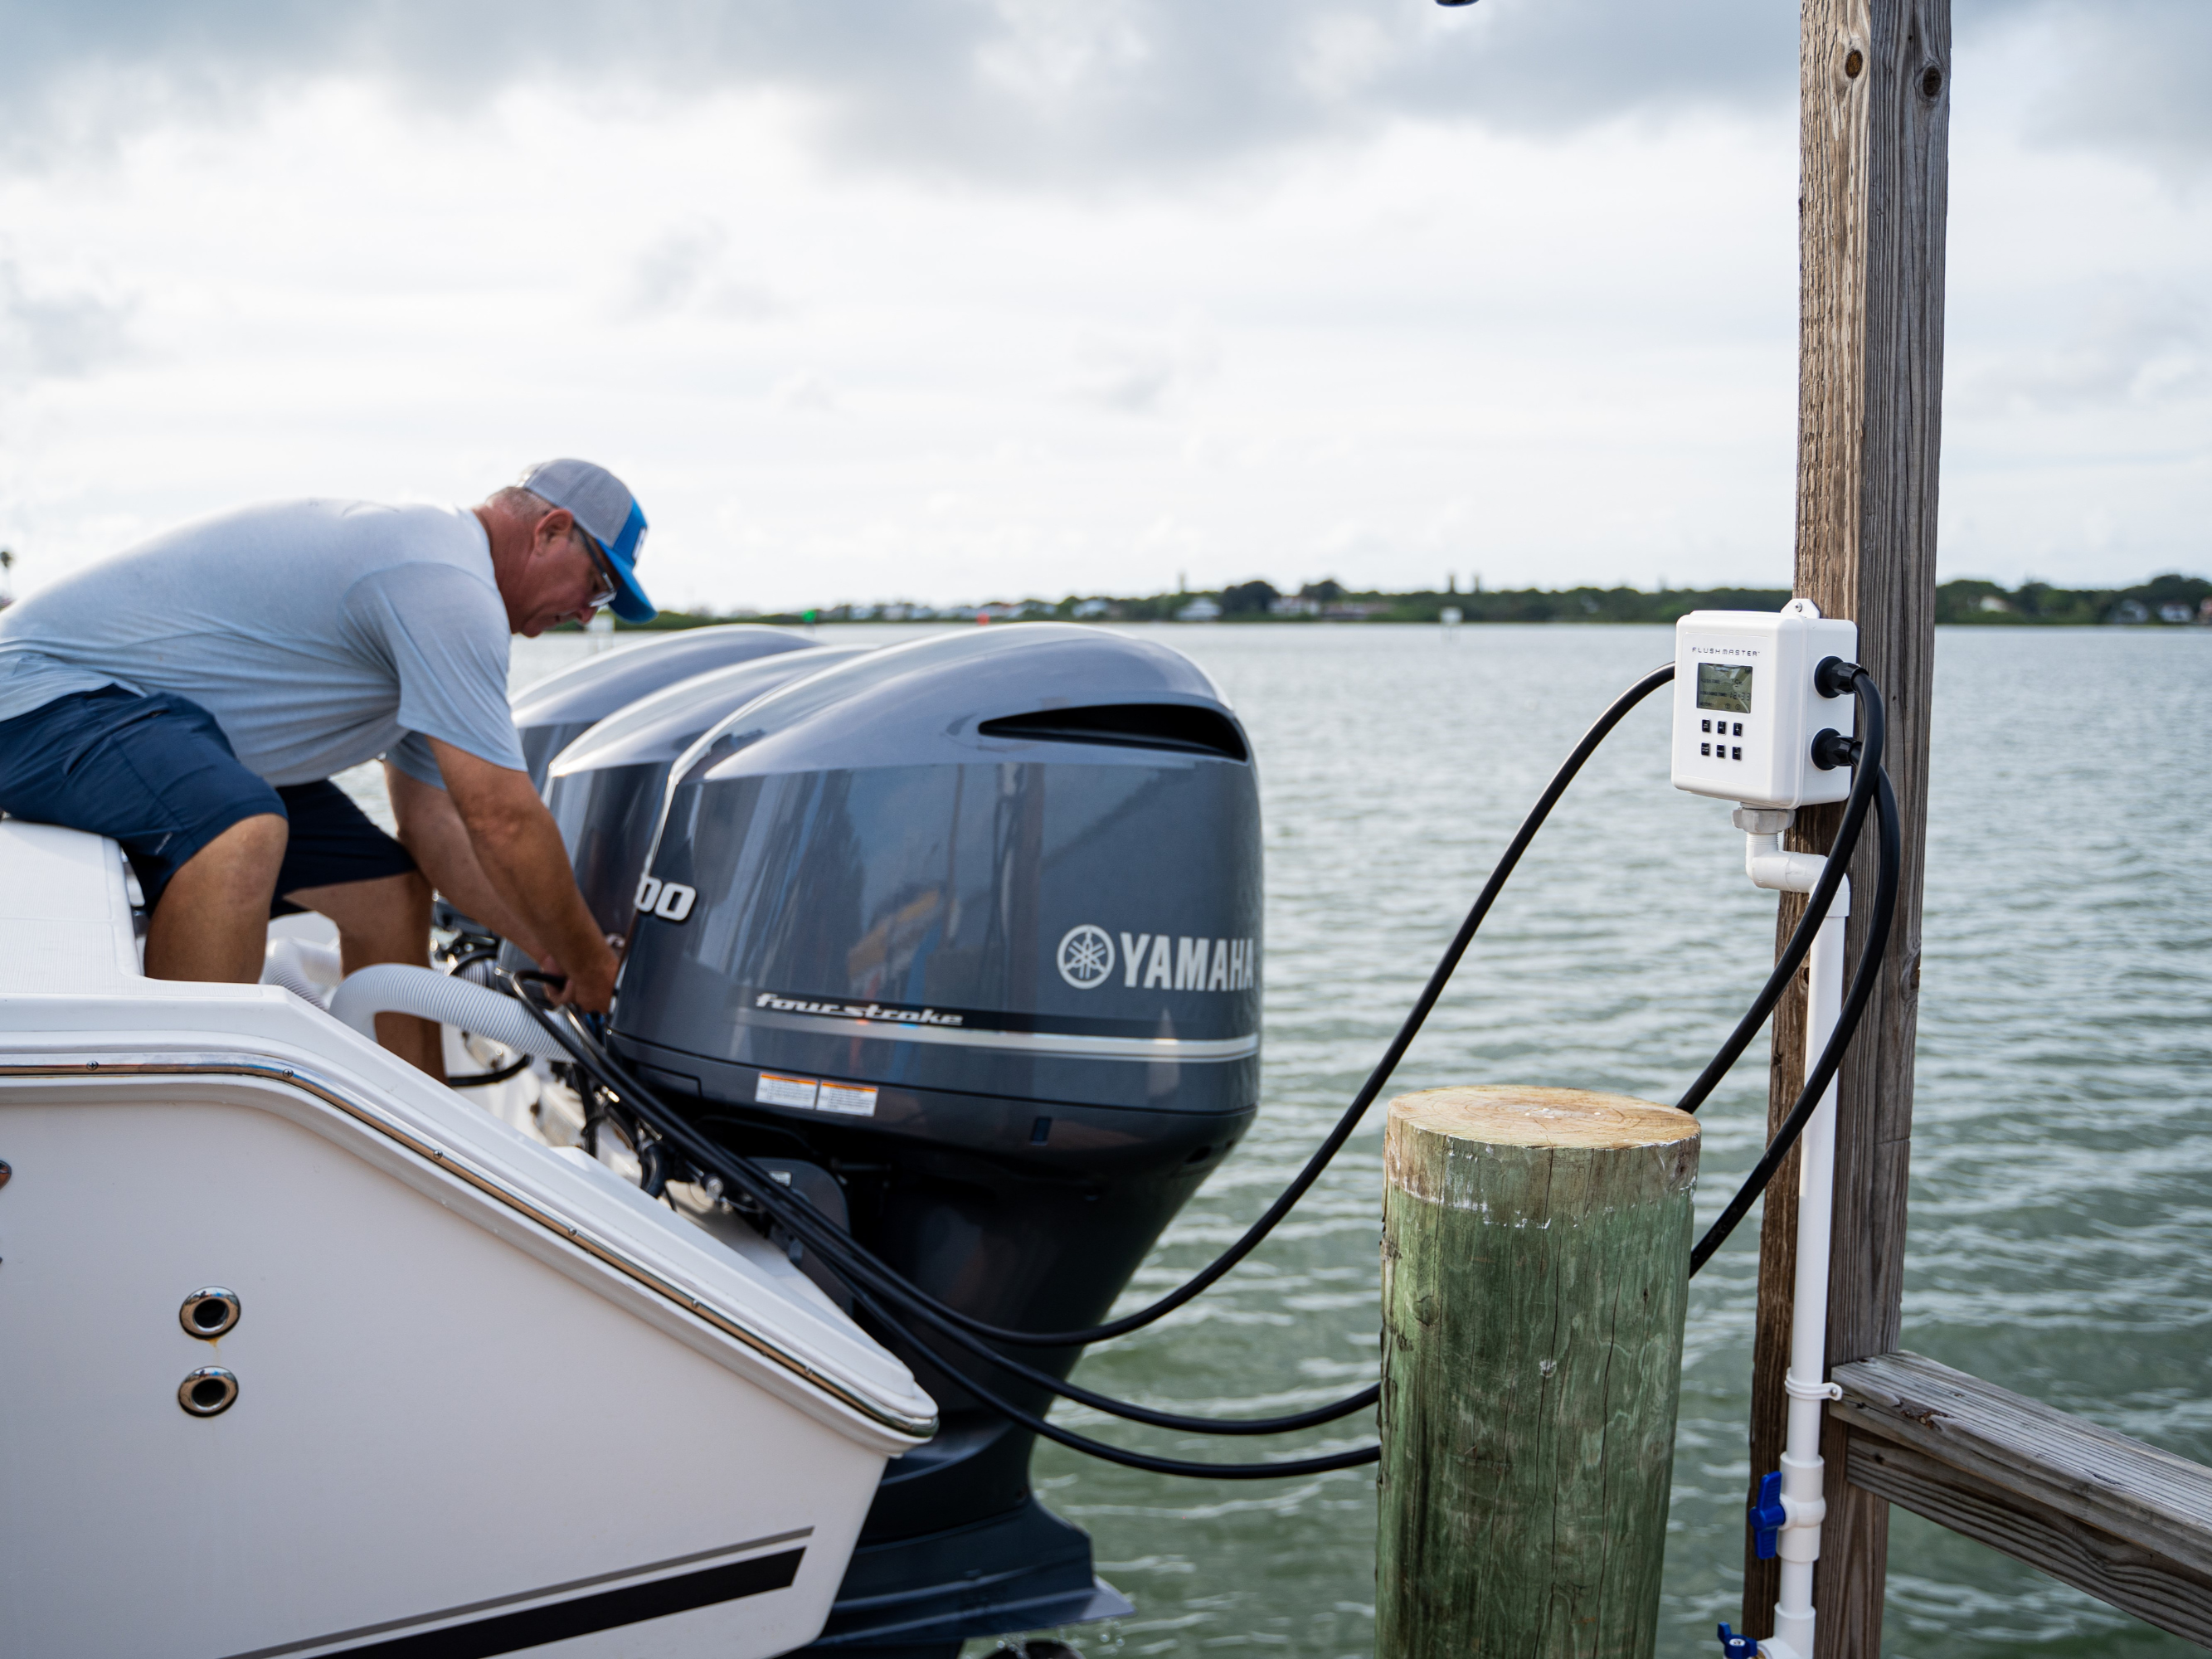 How To Flush a Yamaha Outboard with Flushmaster